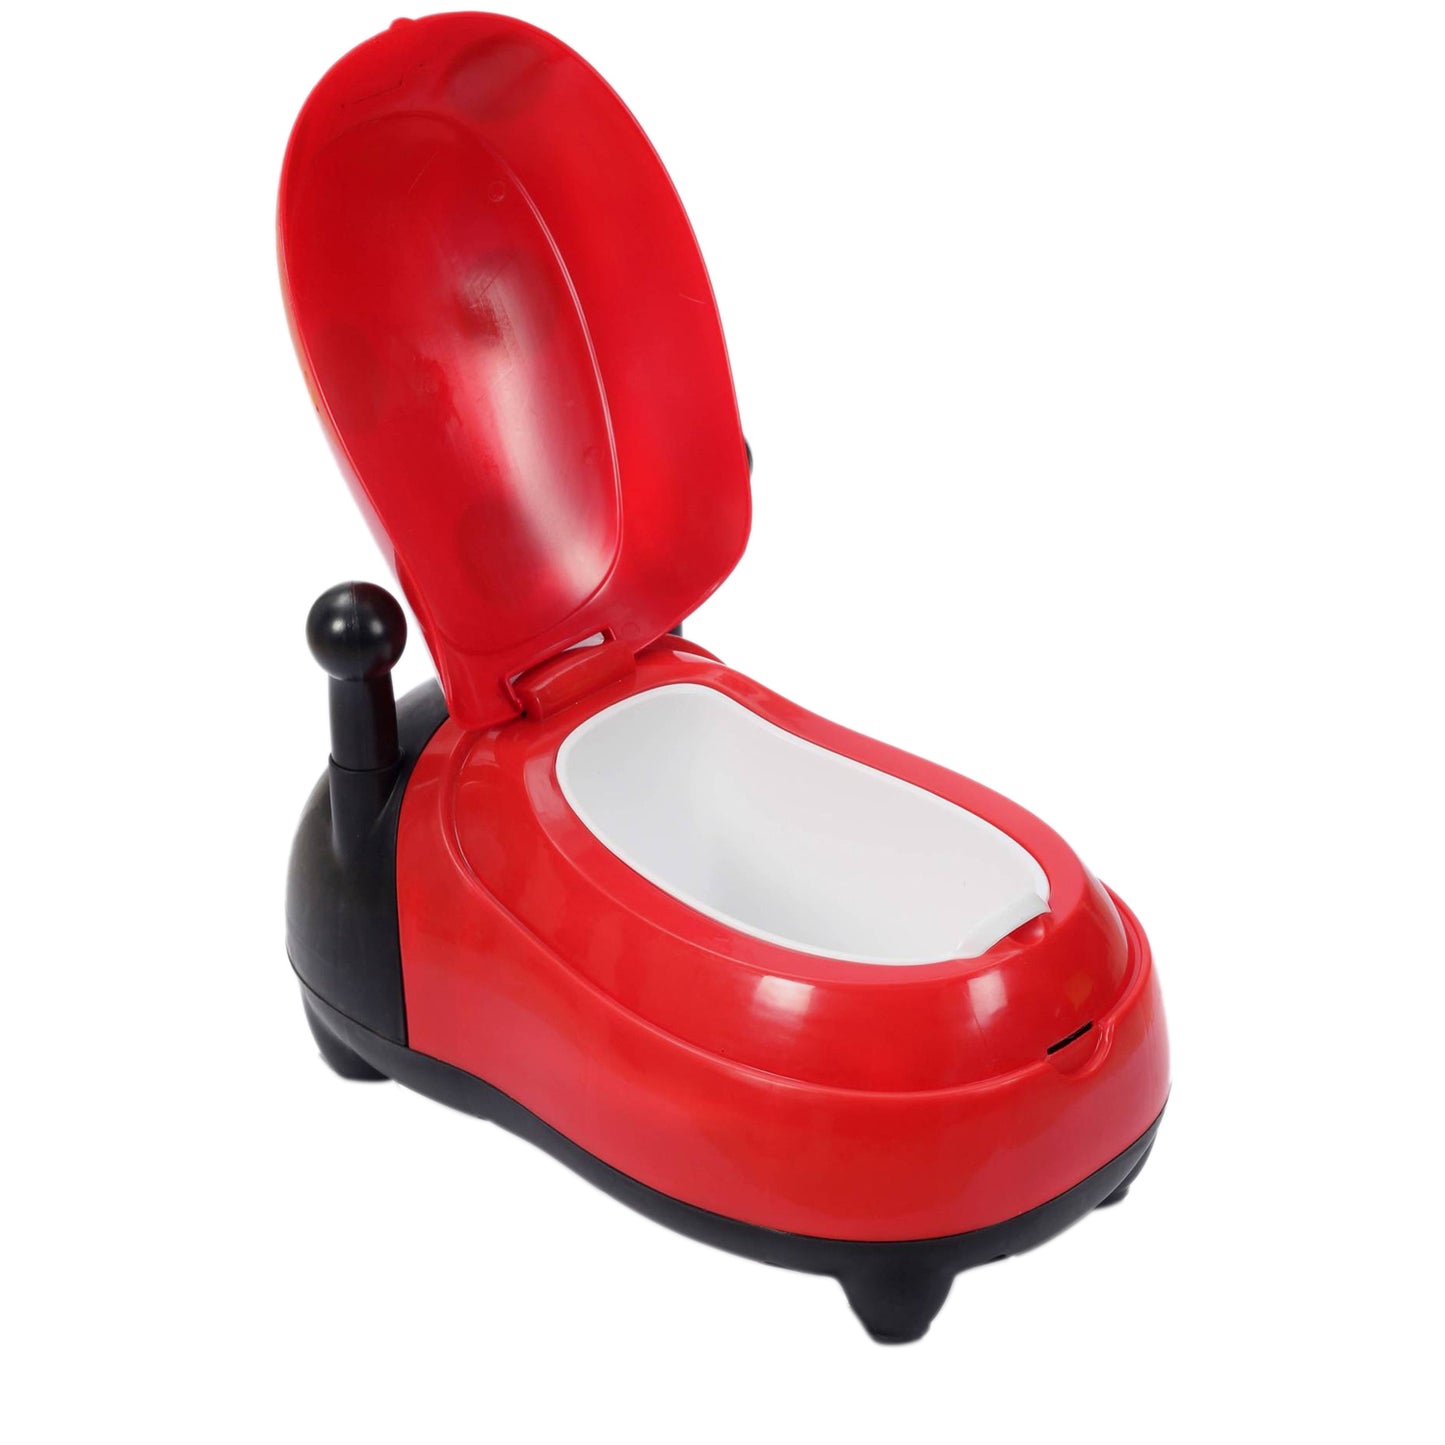 Insect Shaped Potty Trainer(Without Packing)